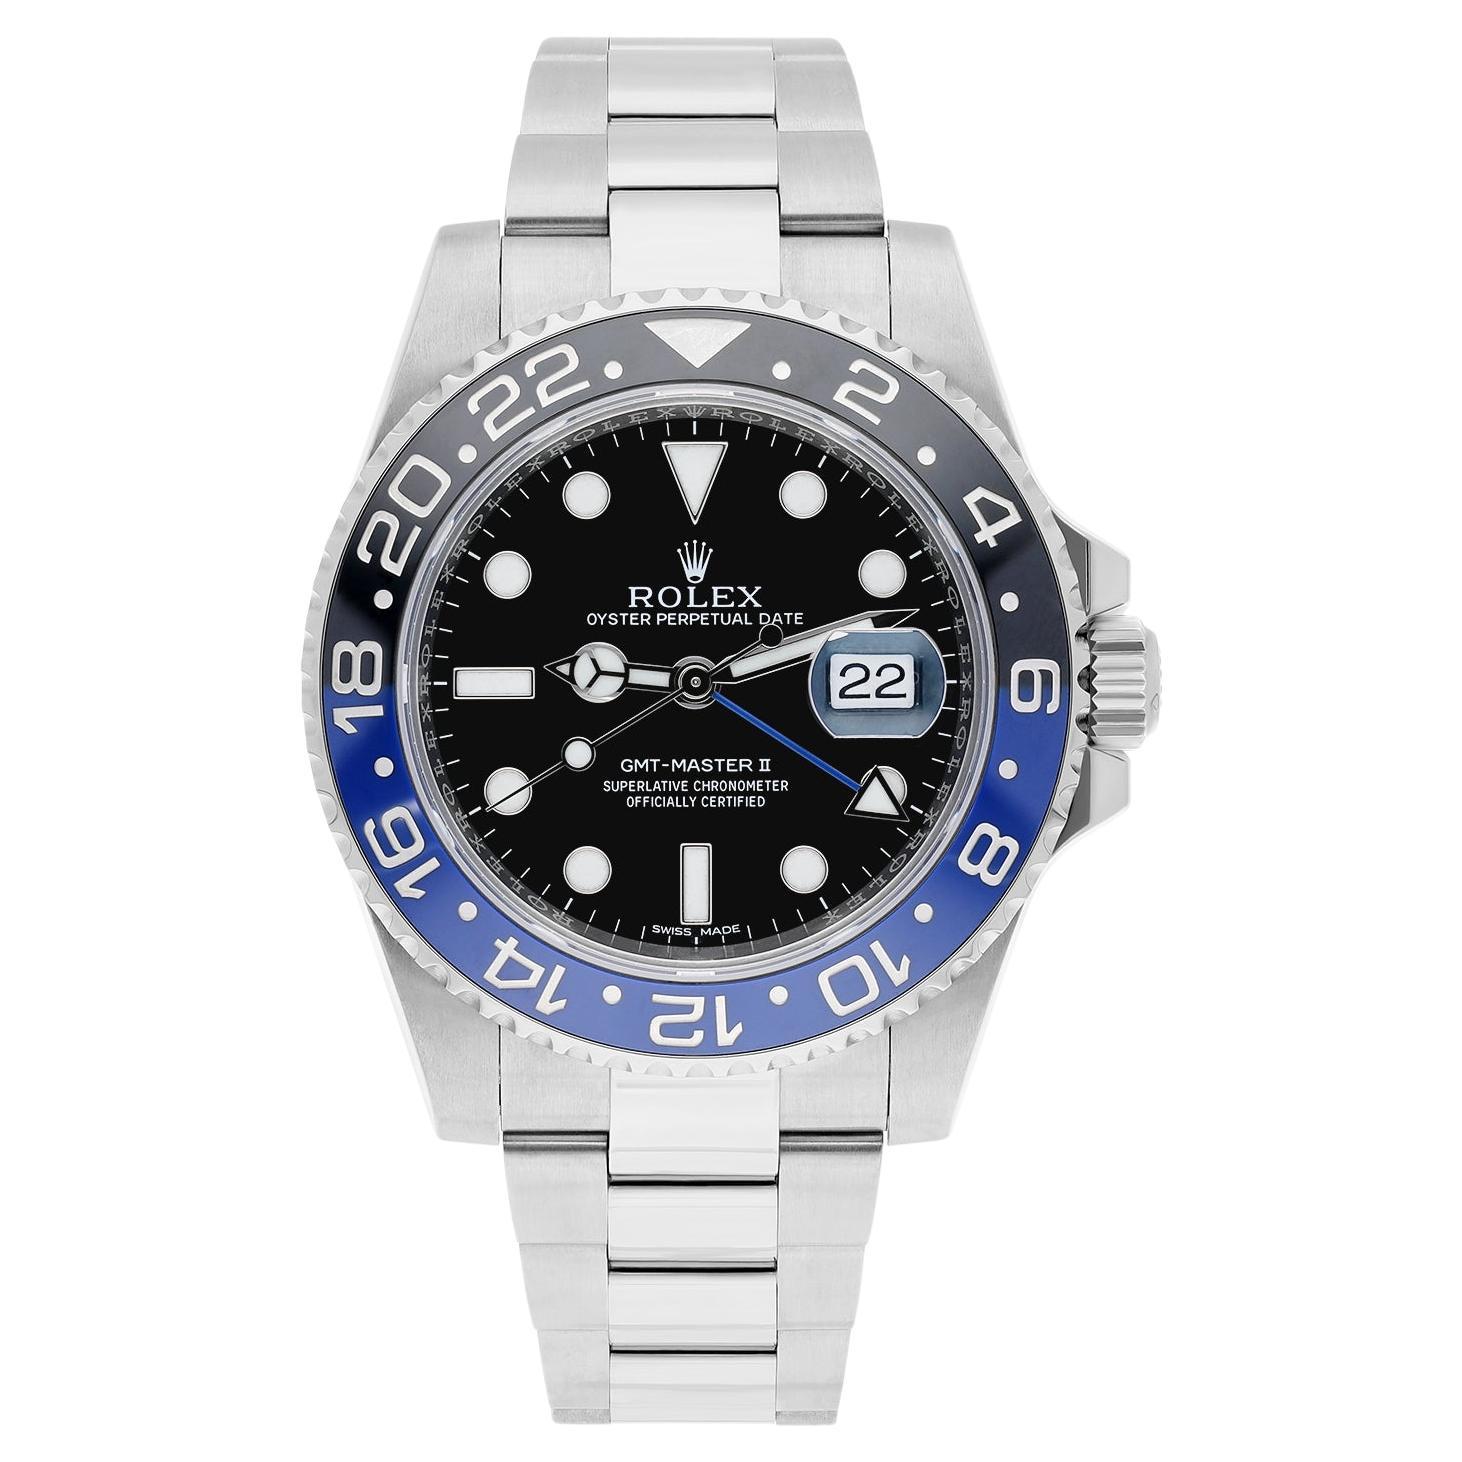 This Rolex GMT-Master II comes in a 40mm stainless steel case with matching oyster bracelet. The bi-directional bezel is made out of blue and black ceramic and can be used to tell the time in multiple time zones simultaneously. This Rolex comes